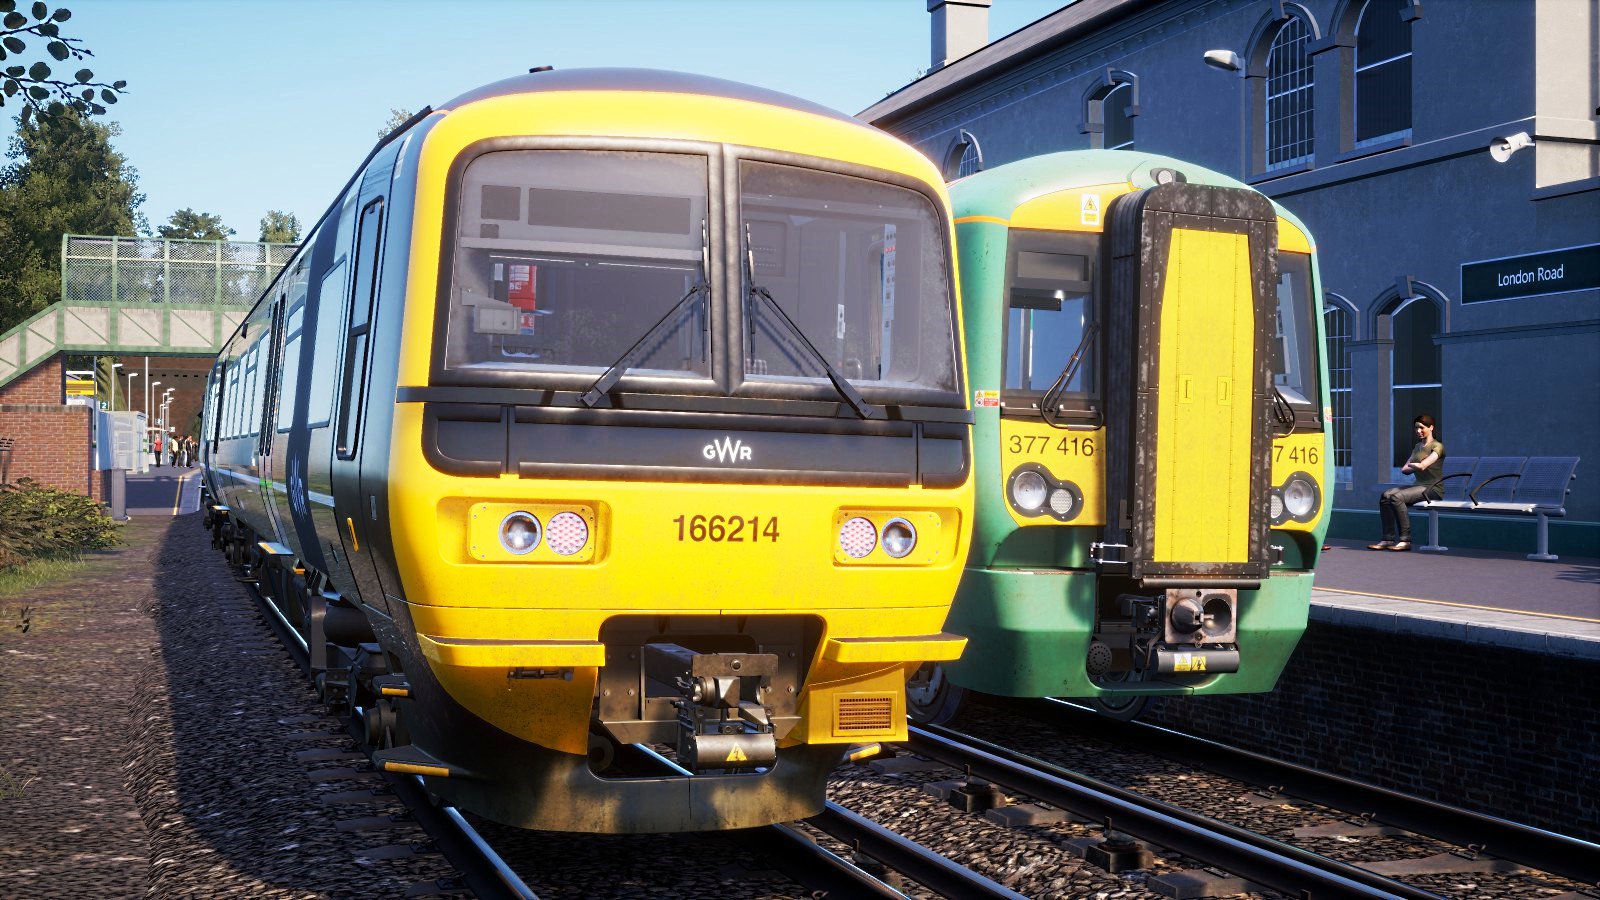 Class 166 Class 377 together on East Coastway